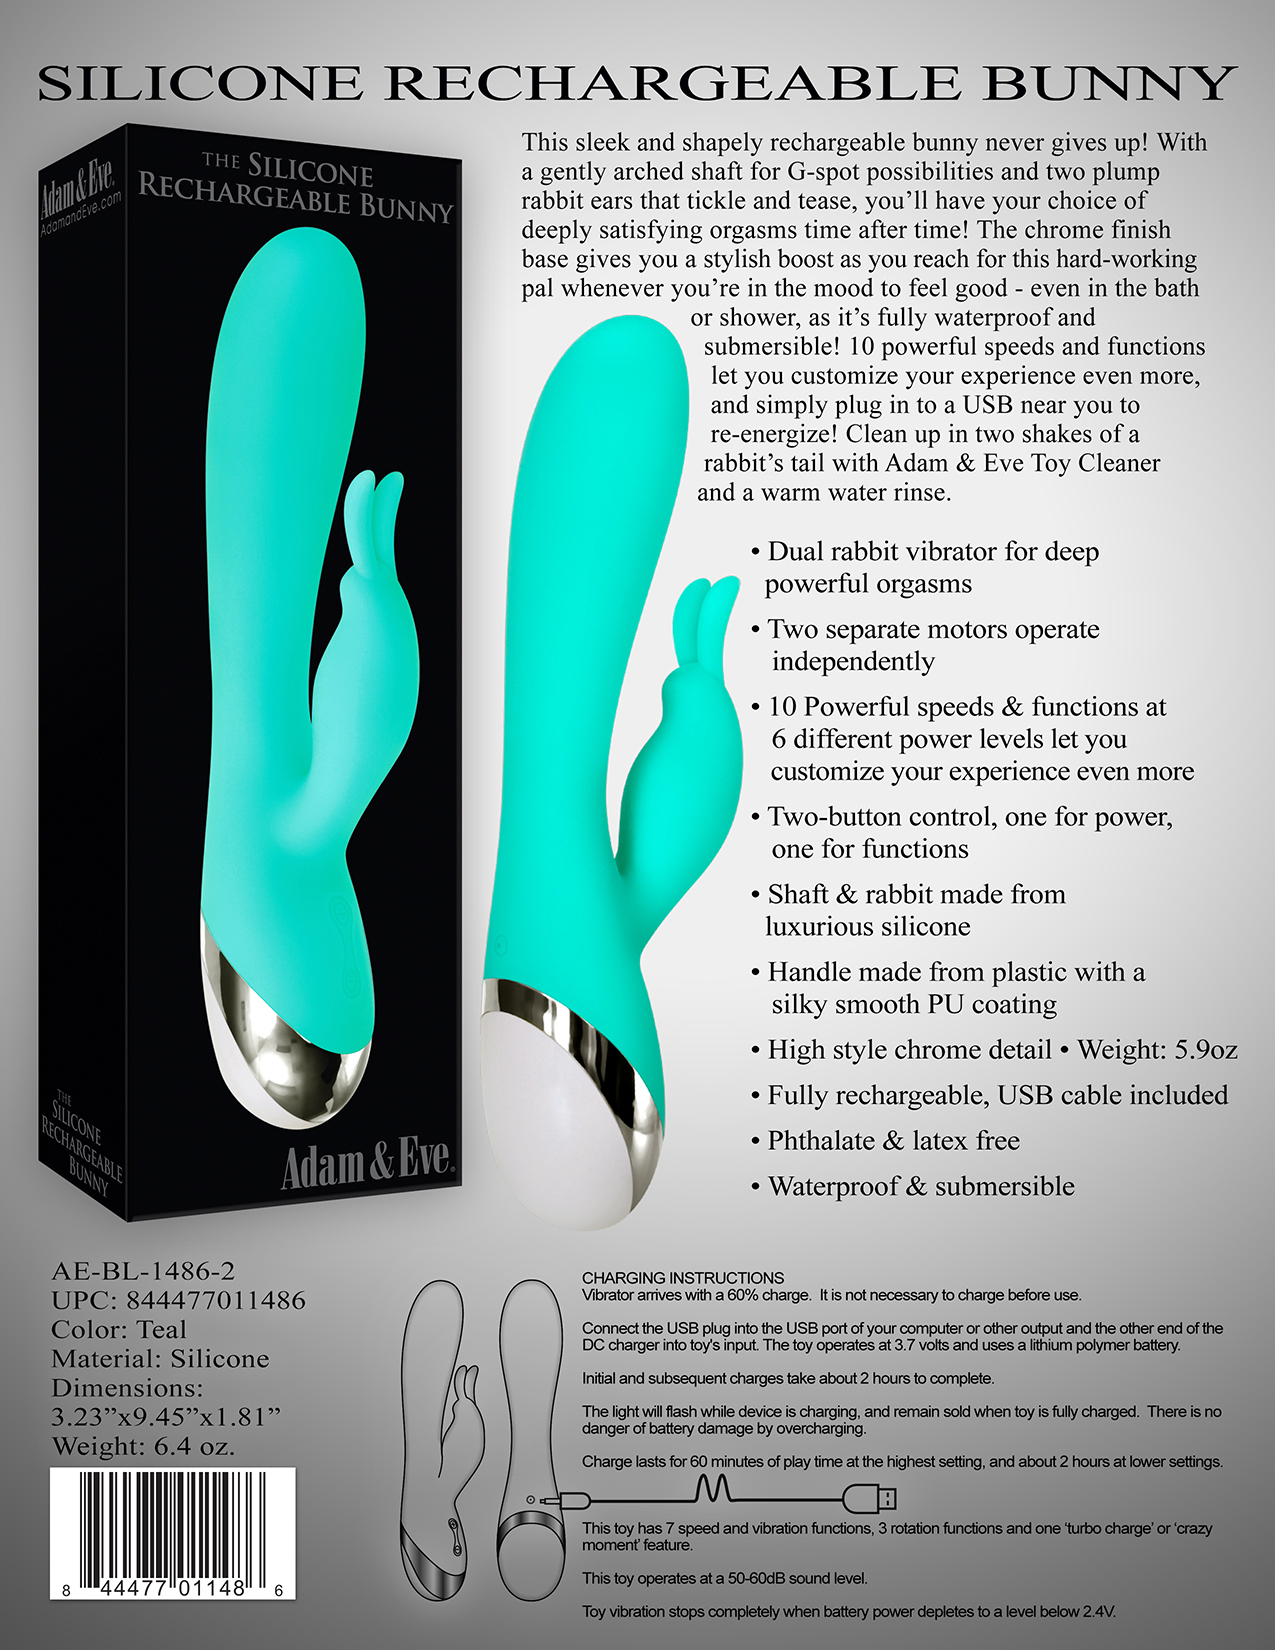 The-Silicone-Rechargeable-Bunny-back.jpg